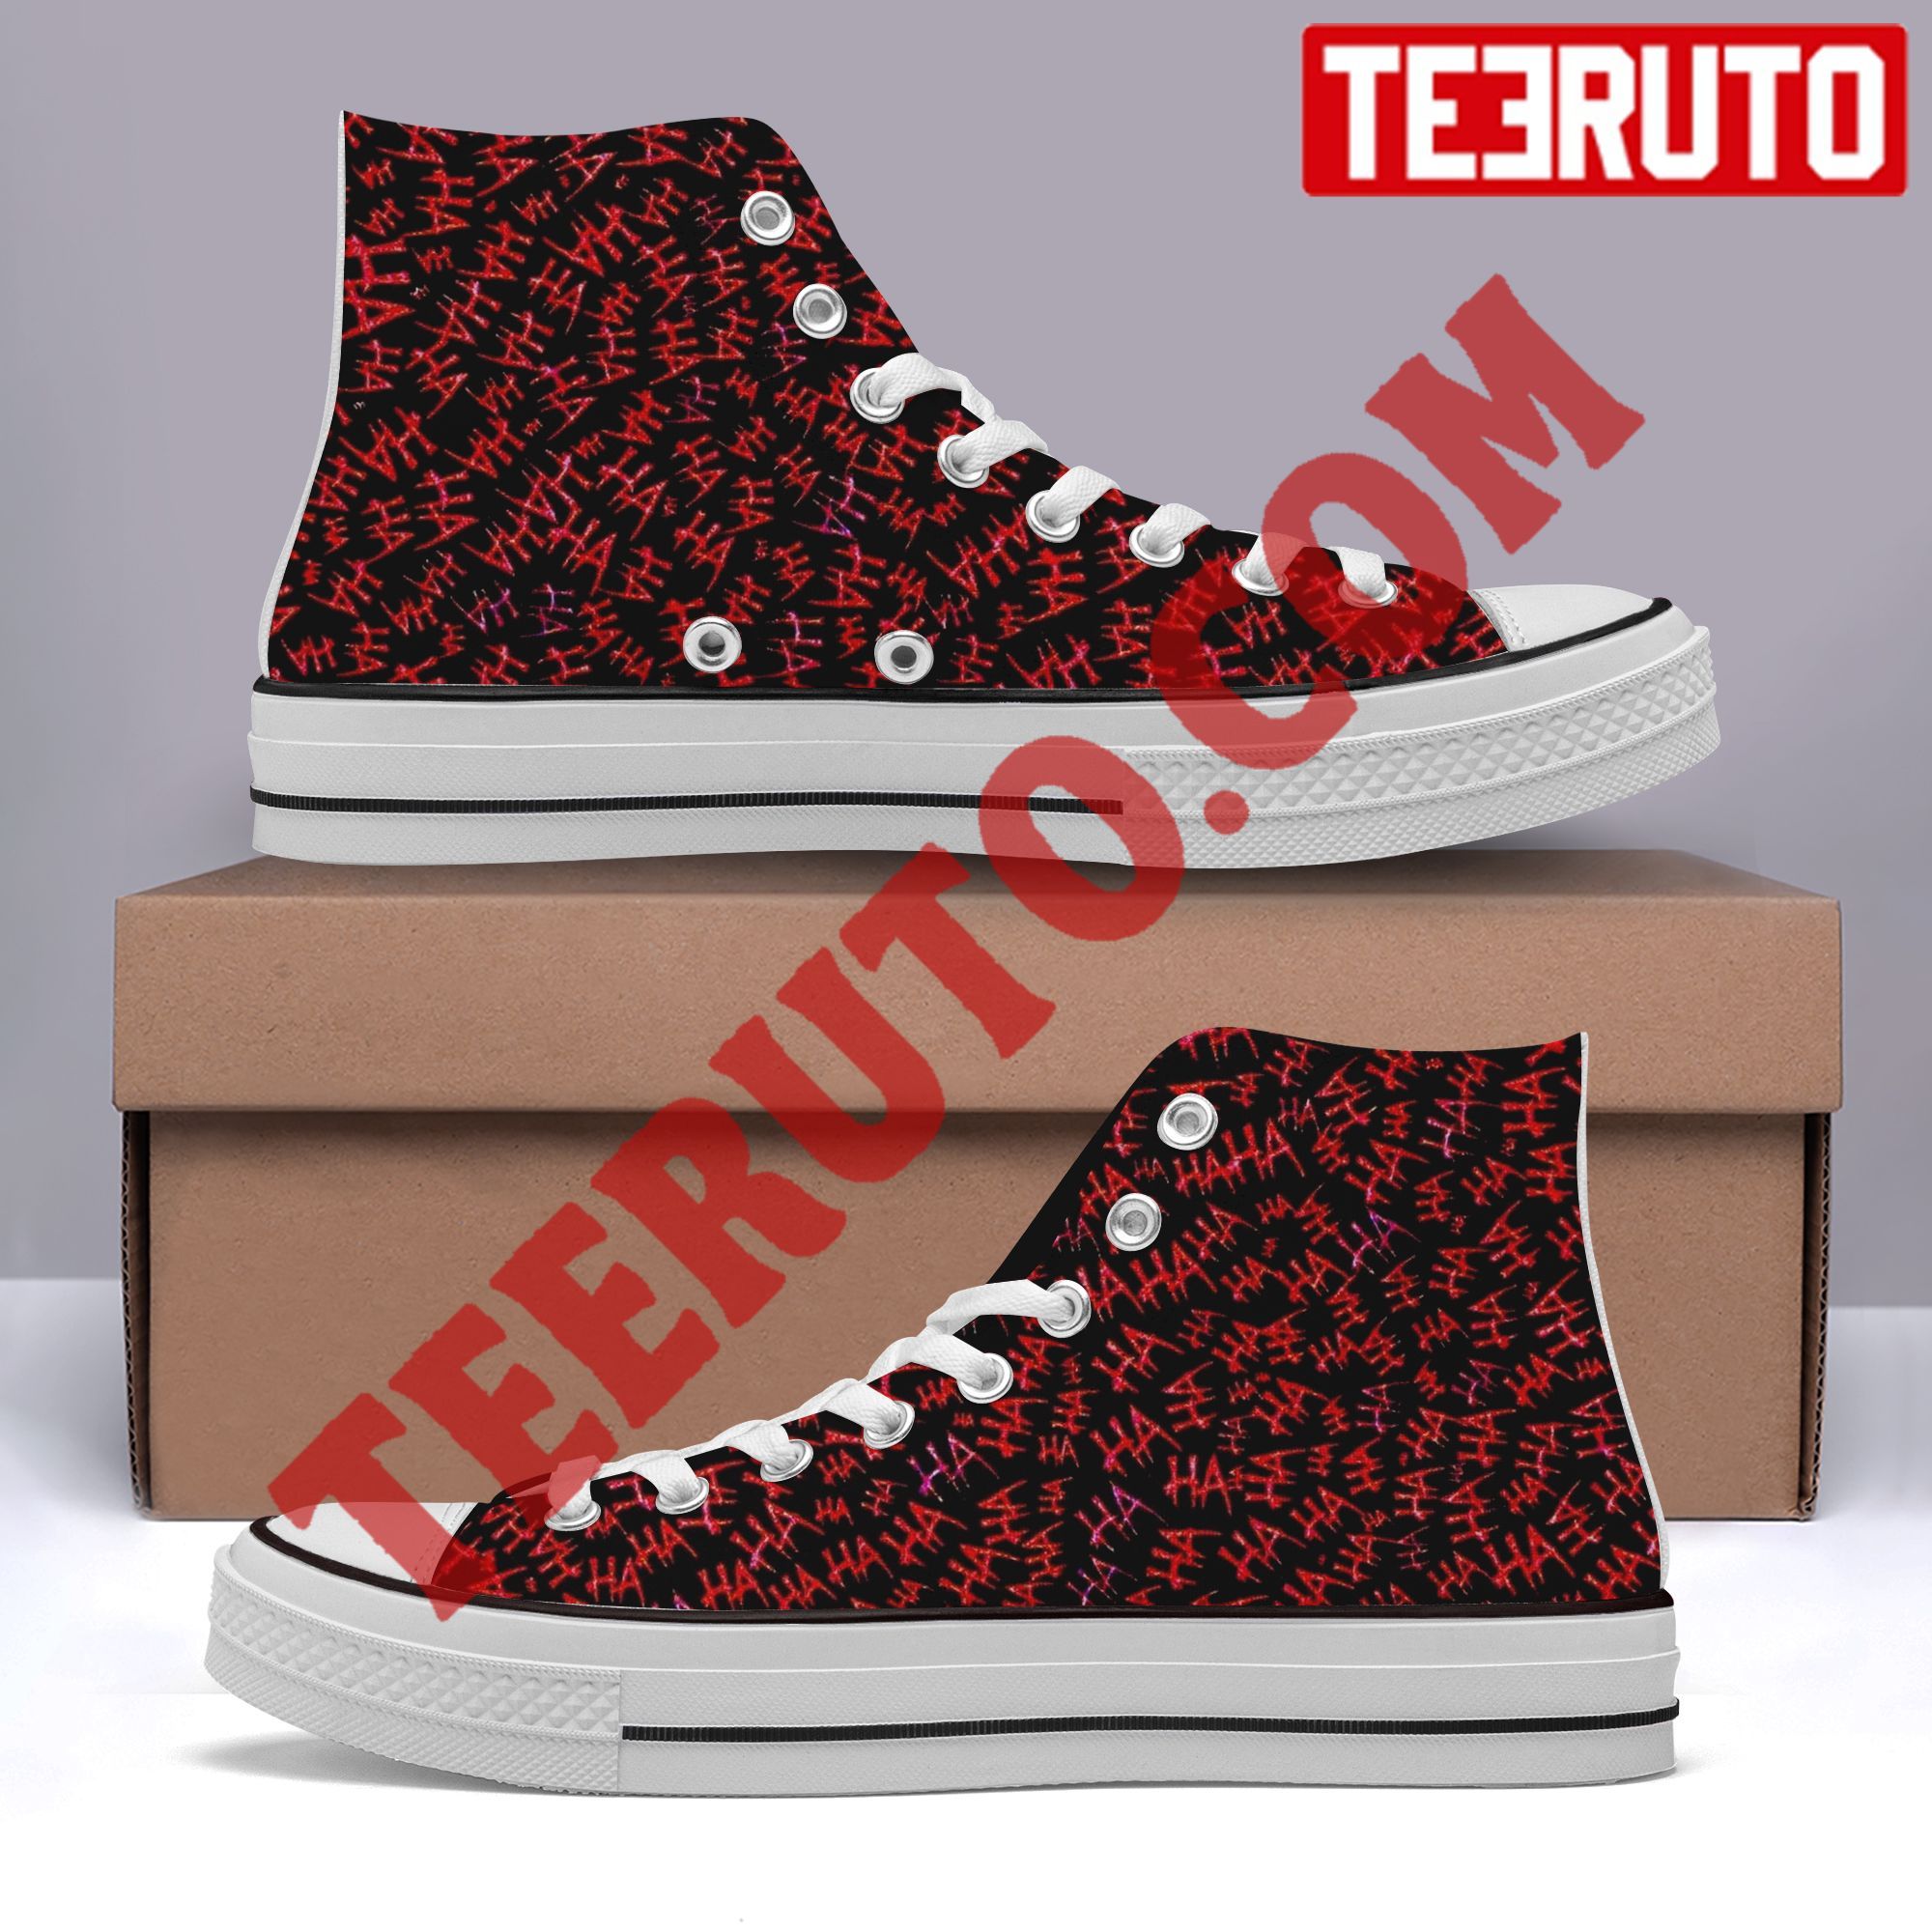 Hahaha Laughing Red Blood Print Design Halloween Scary High Top Retro Shoes